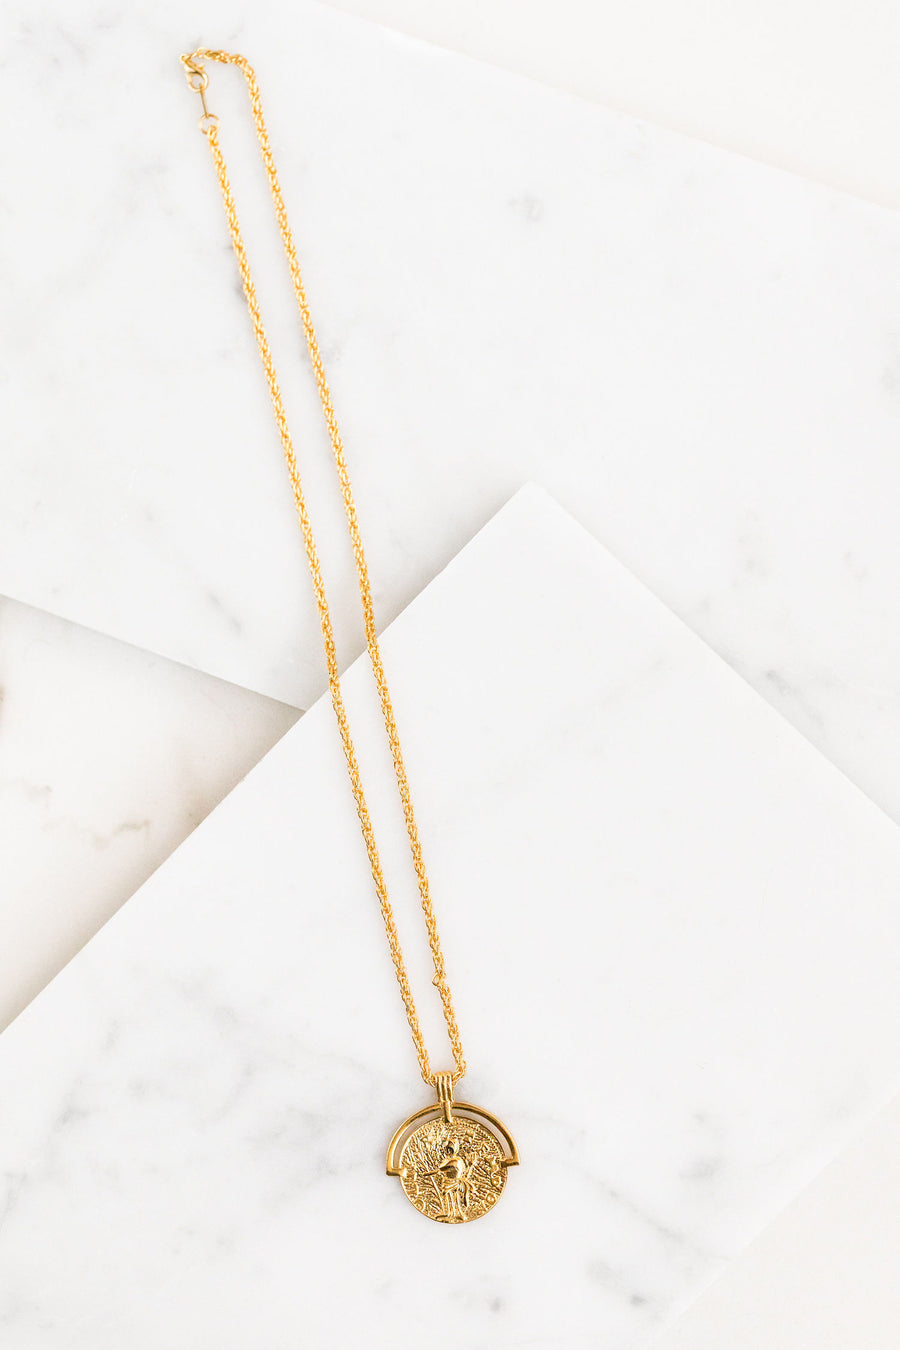 Find the perfect necklace you're looking for from Charme Silkiner! This beautiful 14K Gold Plated Necklace with a Greek Medallion is perfection. Great for layering or wearing alone everyday the Cassian Necklace is the perfect piece of unique jewelry that everyone should own. 